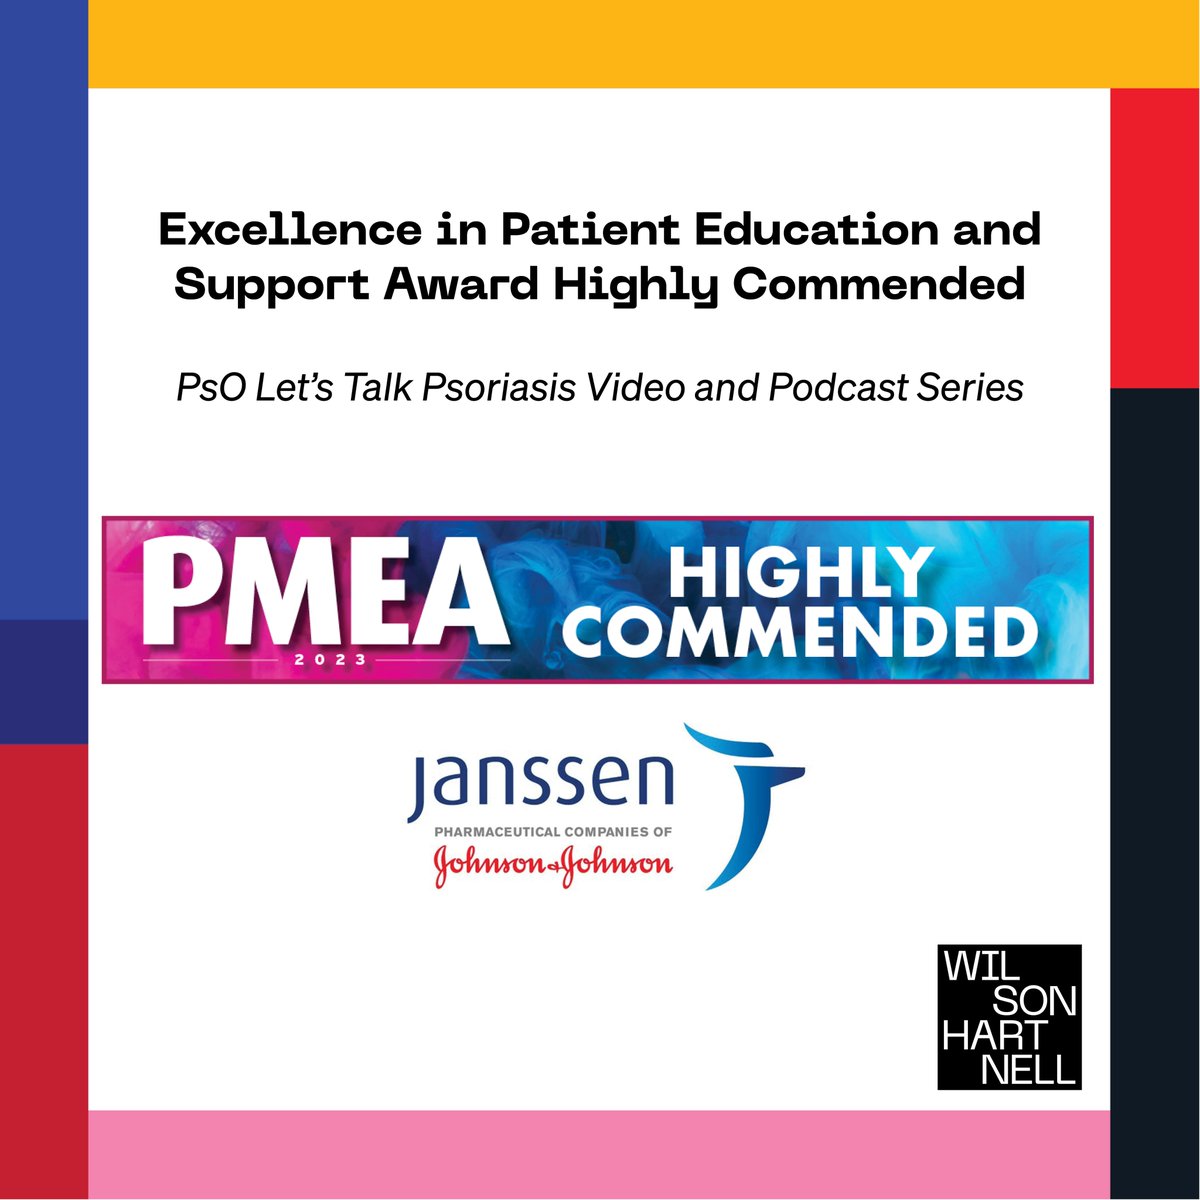 We are delighted to have partnered with our client @JanssenIE on their campaign ‘PsO Let’s Talk Psoriasis’ which was awarded Highly Commended at last week’s PMEA Awards in London!